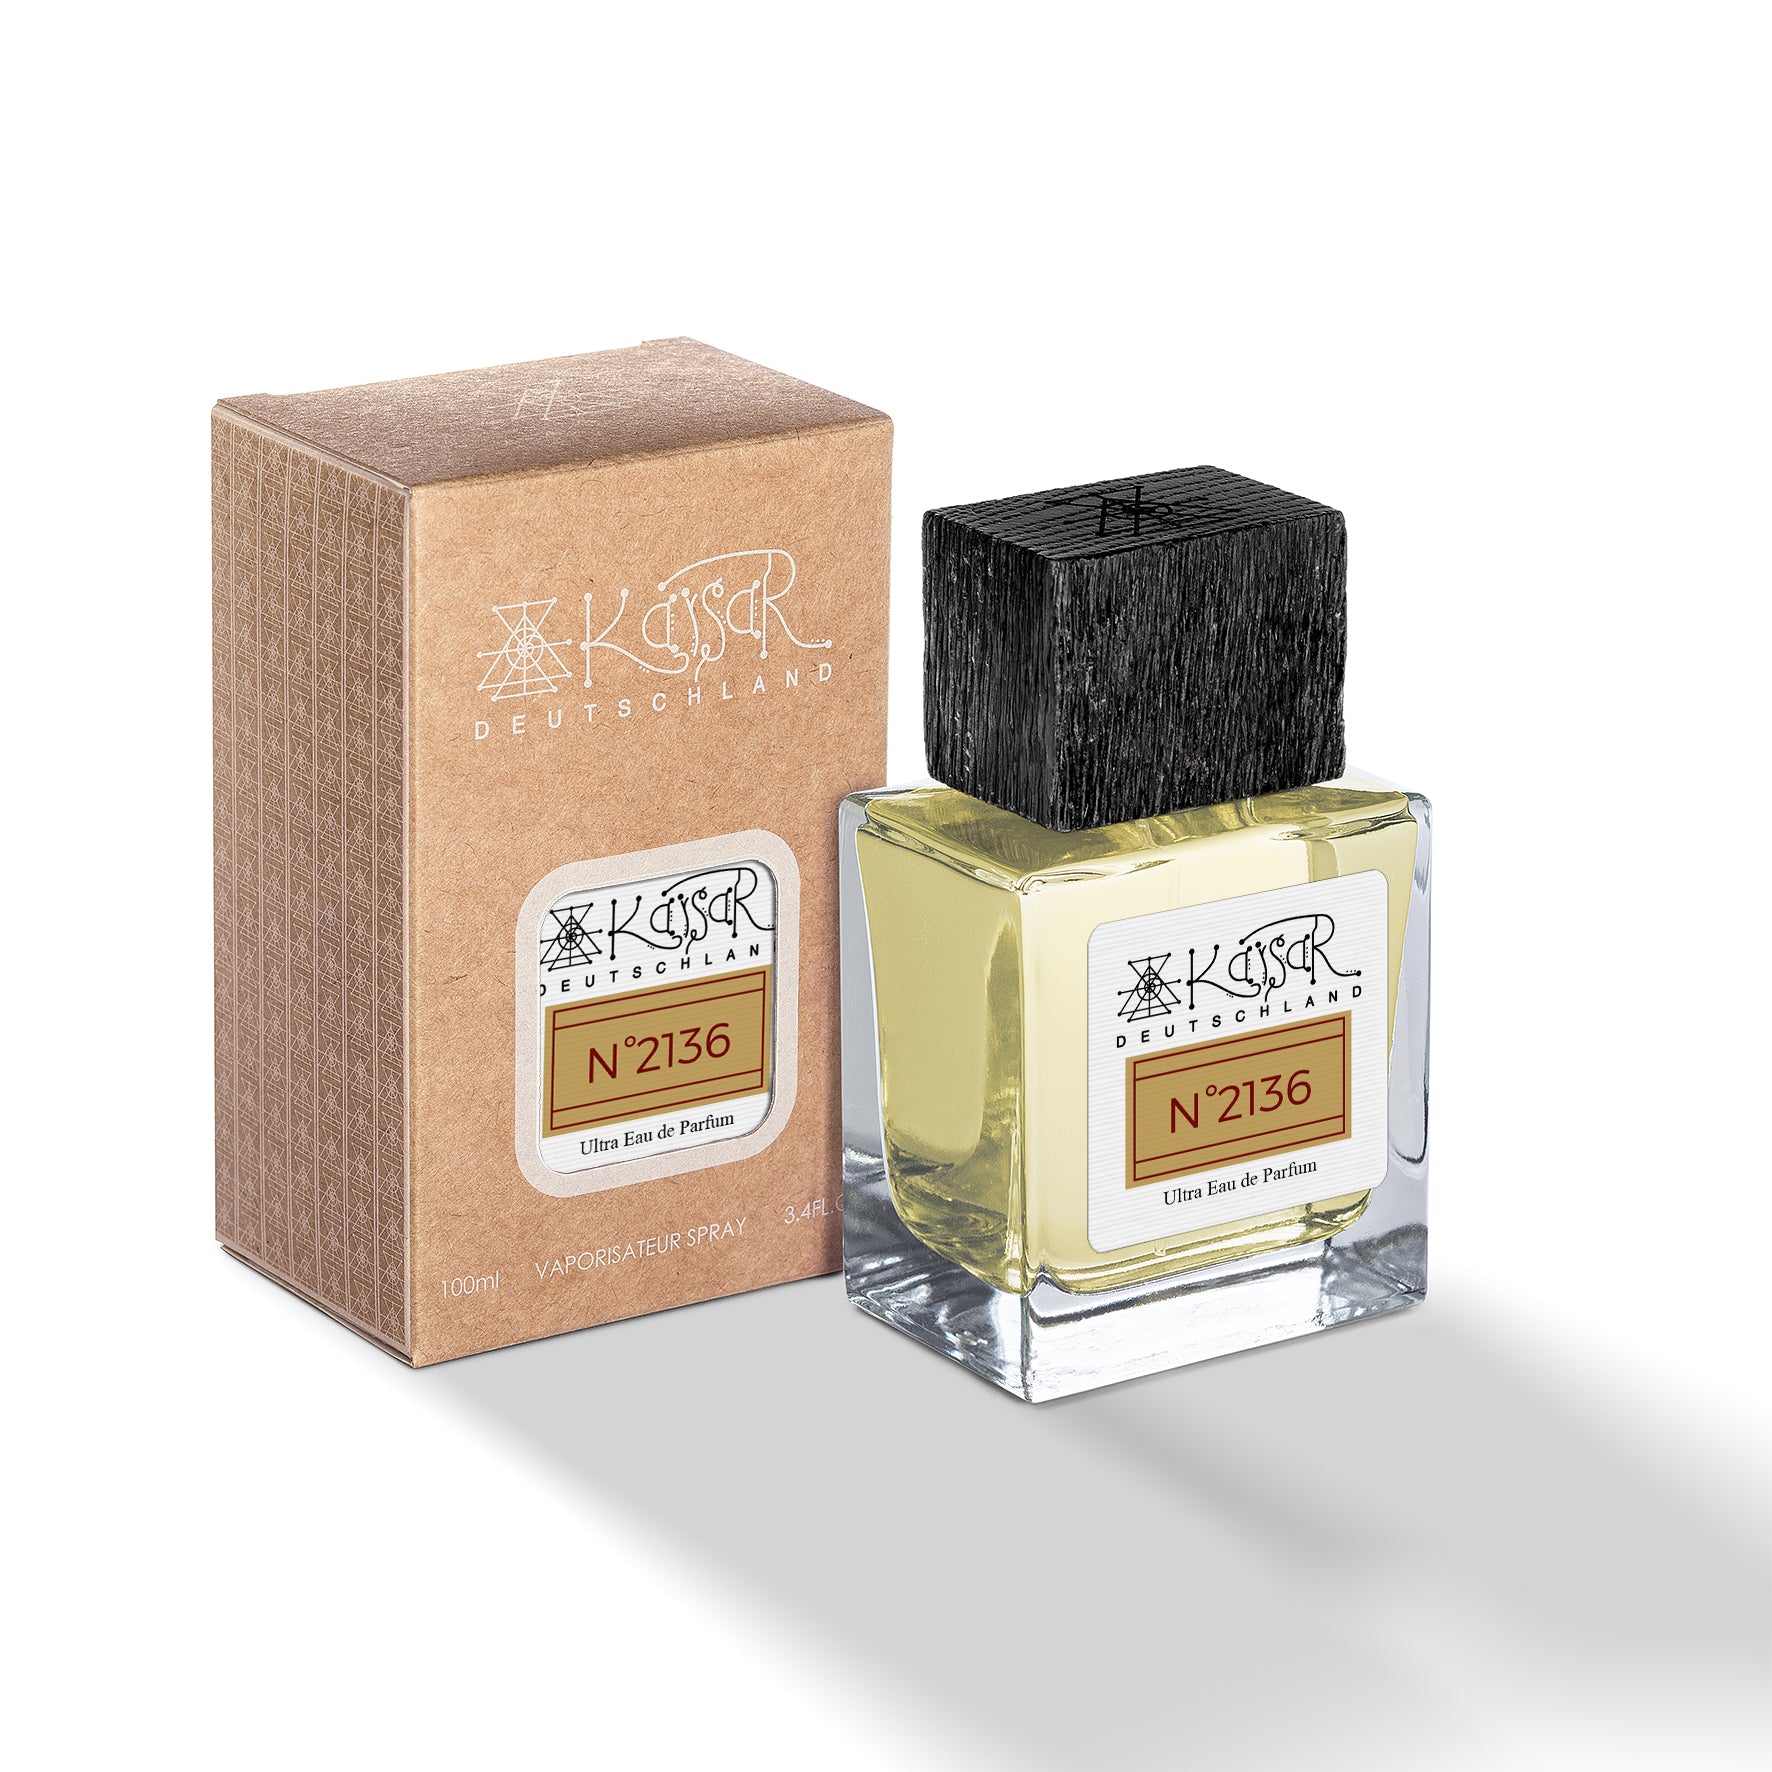 DH 2136 Amber Oud Scent